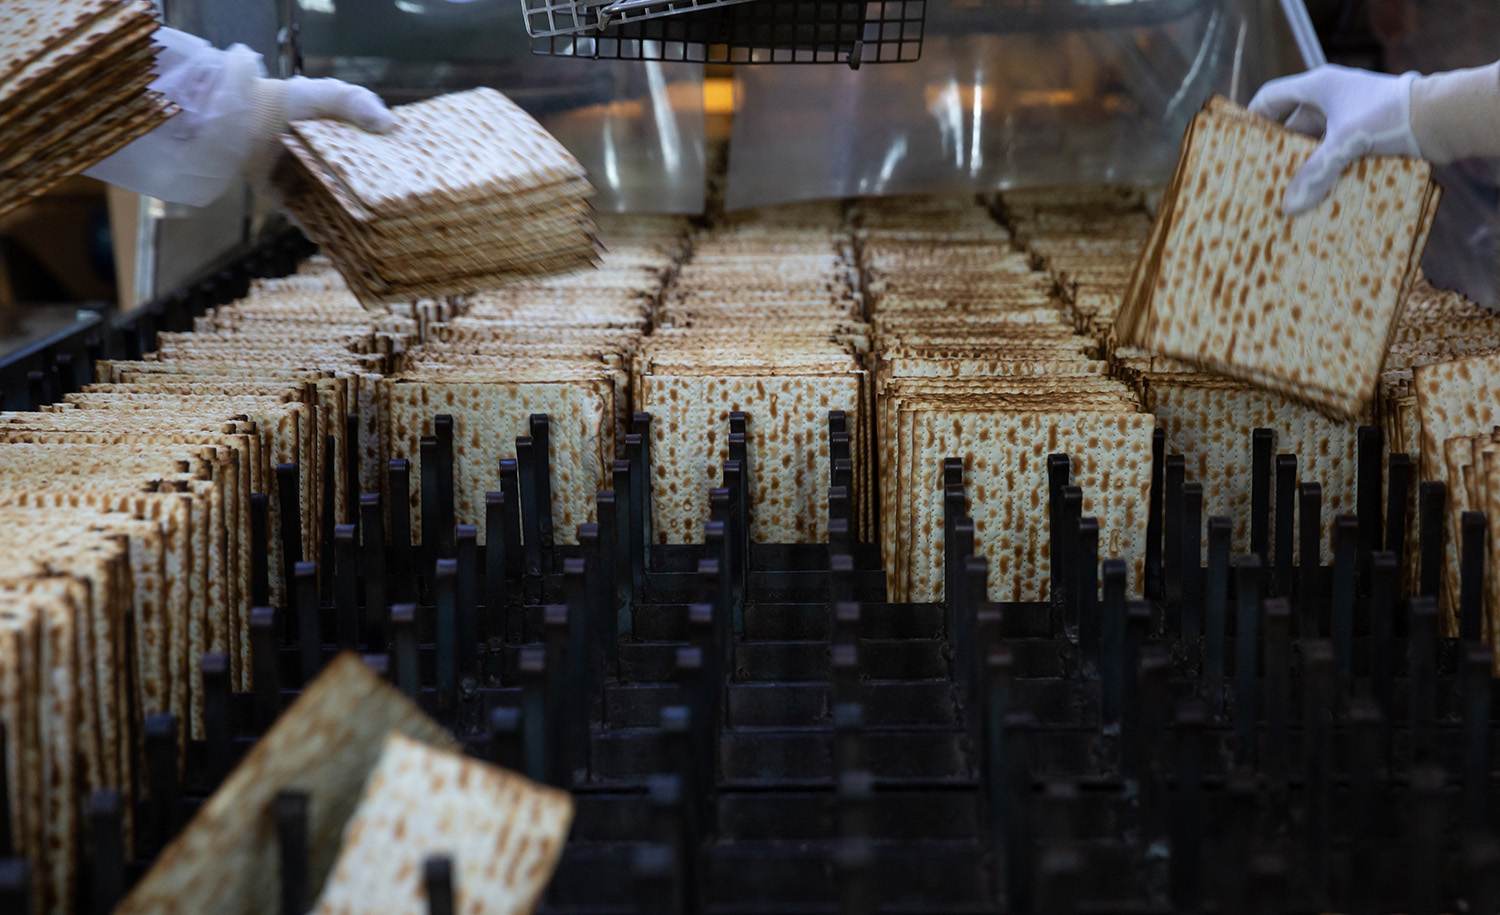 Workers making matzah for Passover in Bnei Brak, Israel in 2020. Guy Prives/Getty Images.
